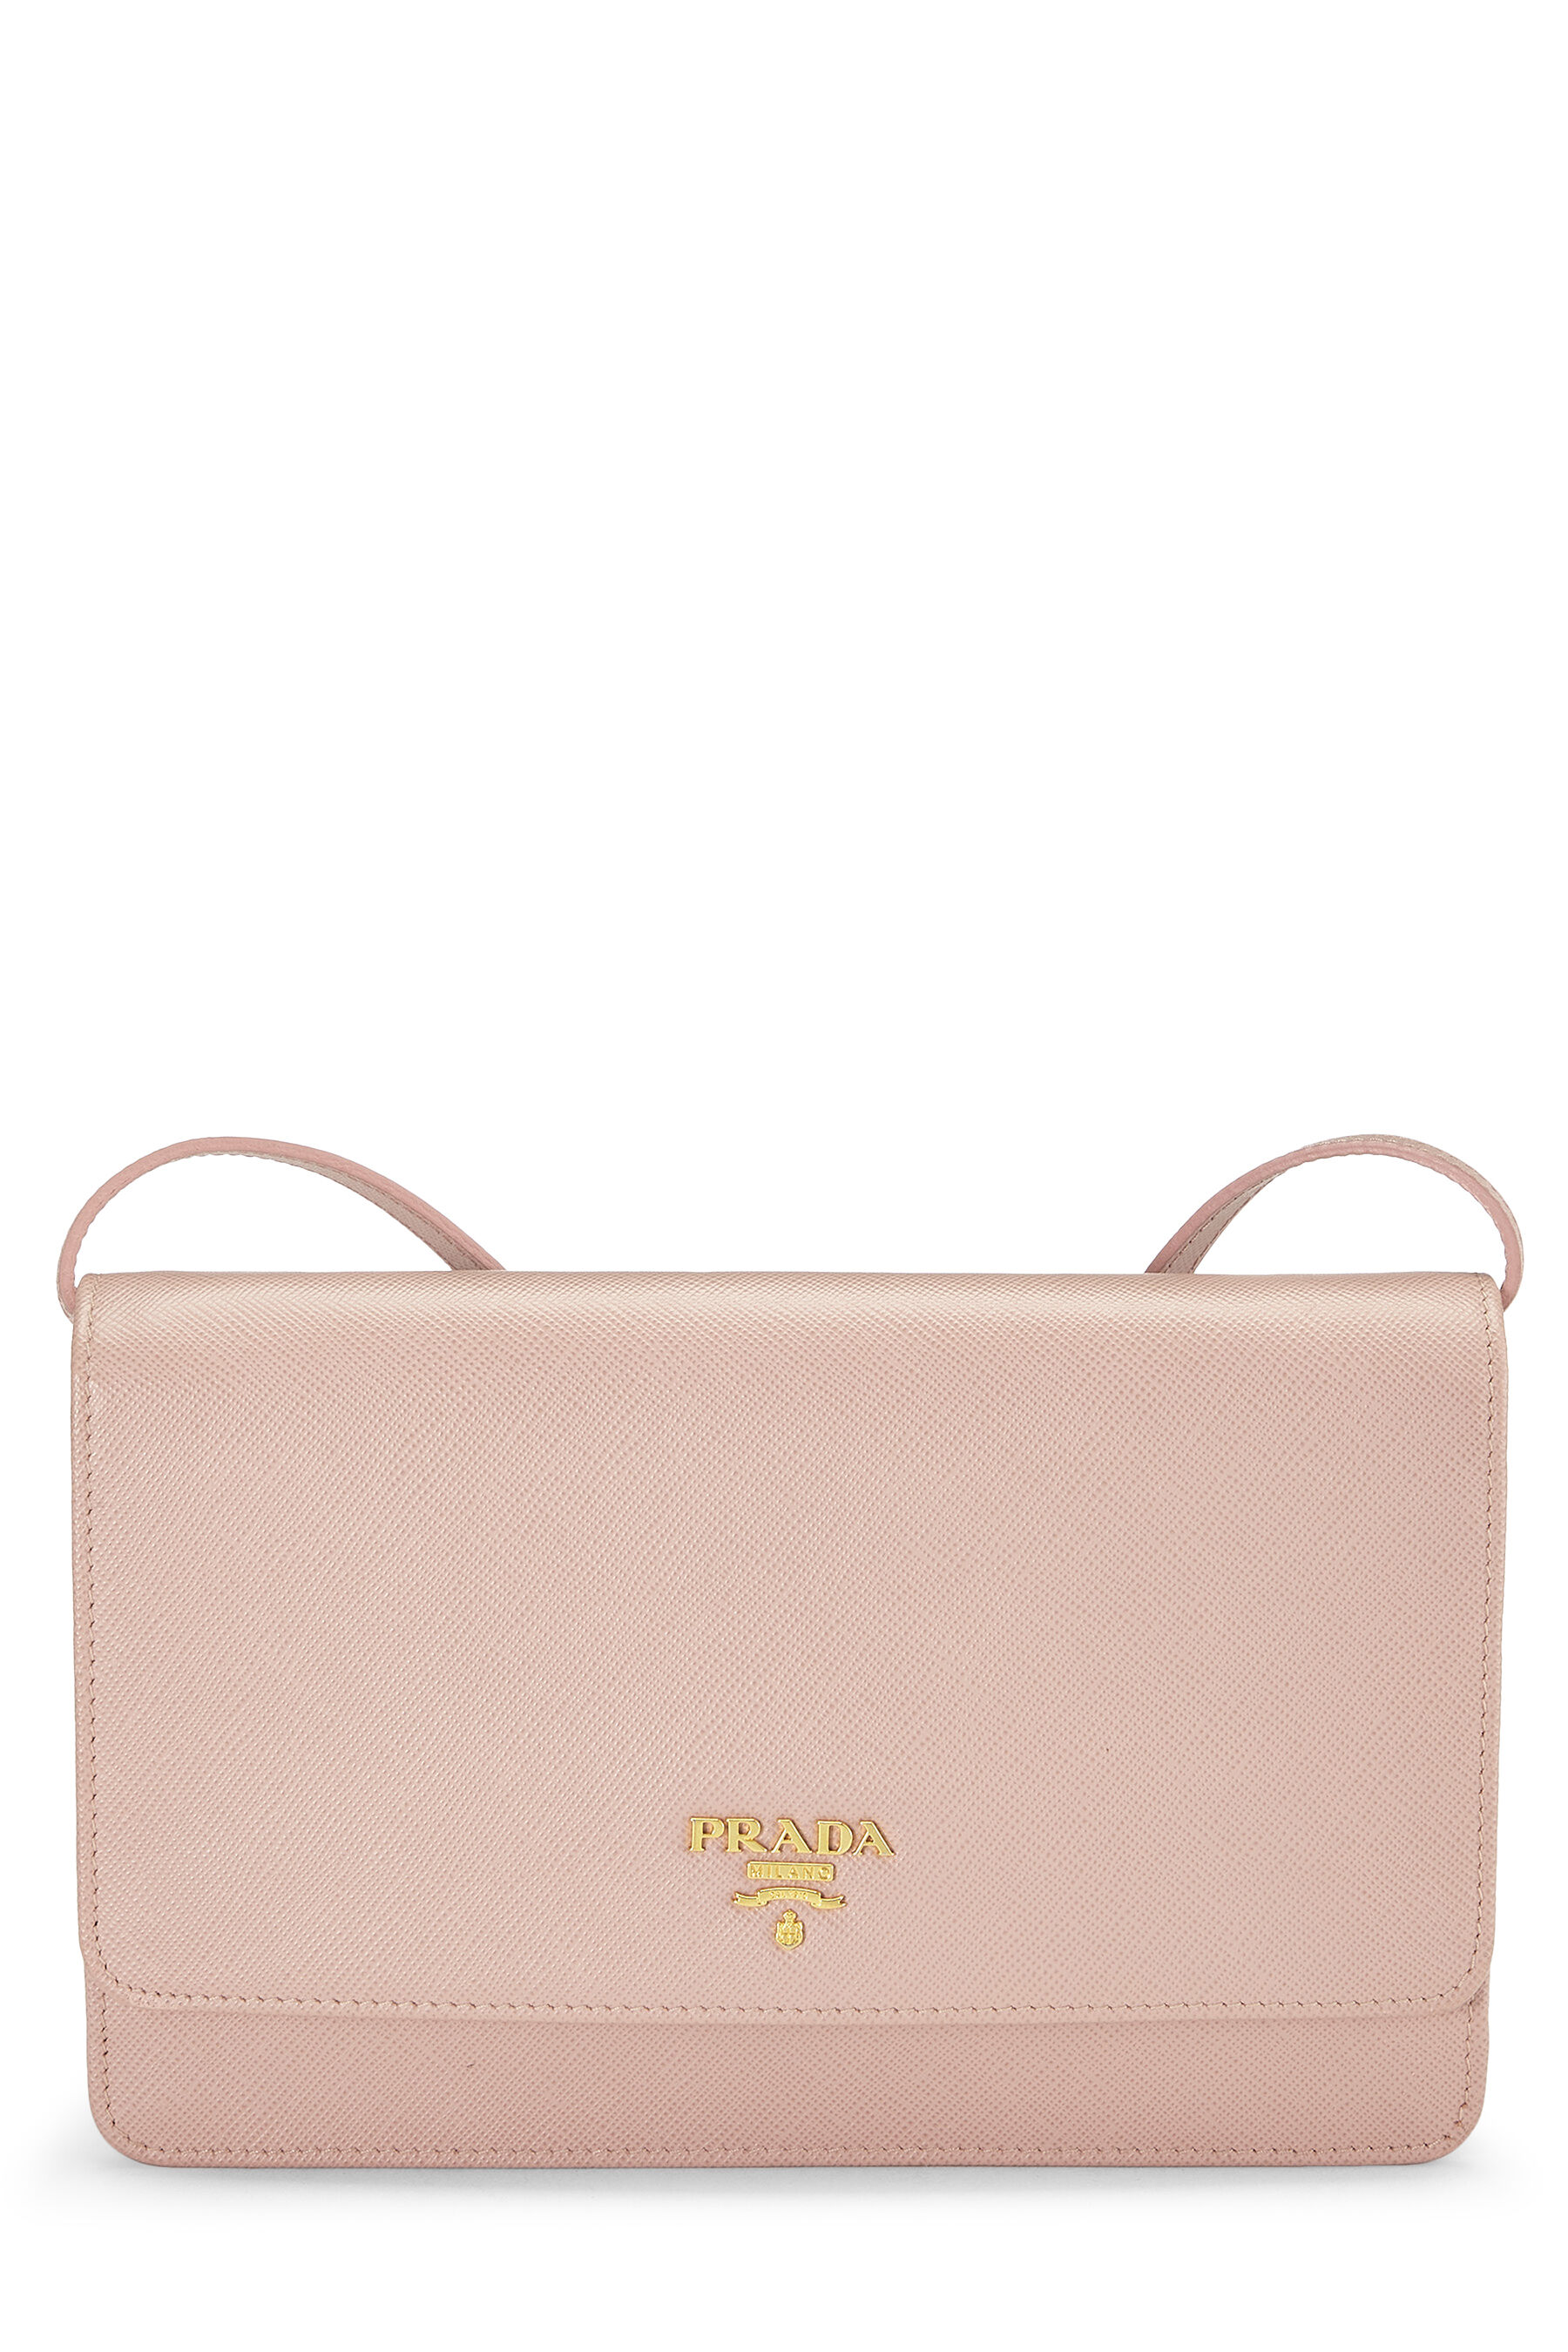 Prada Pink Saffiano Leather Wallet-On-Chain